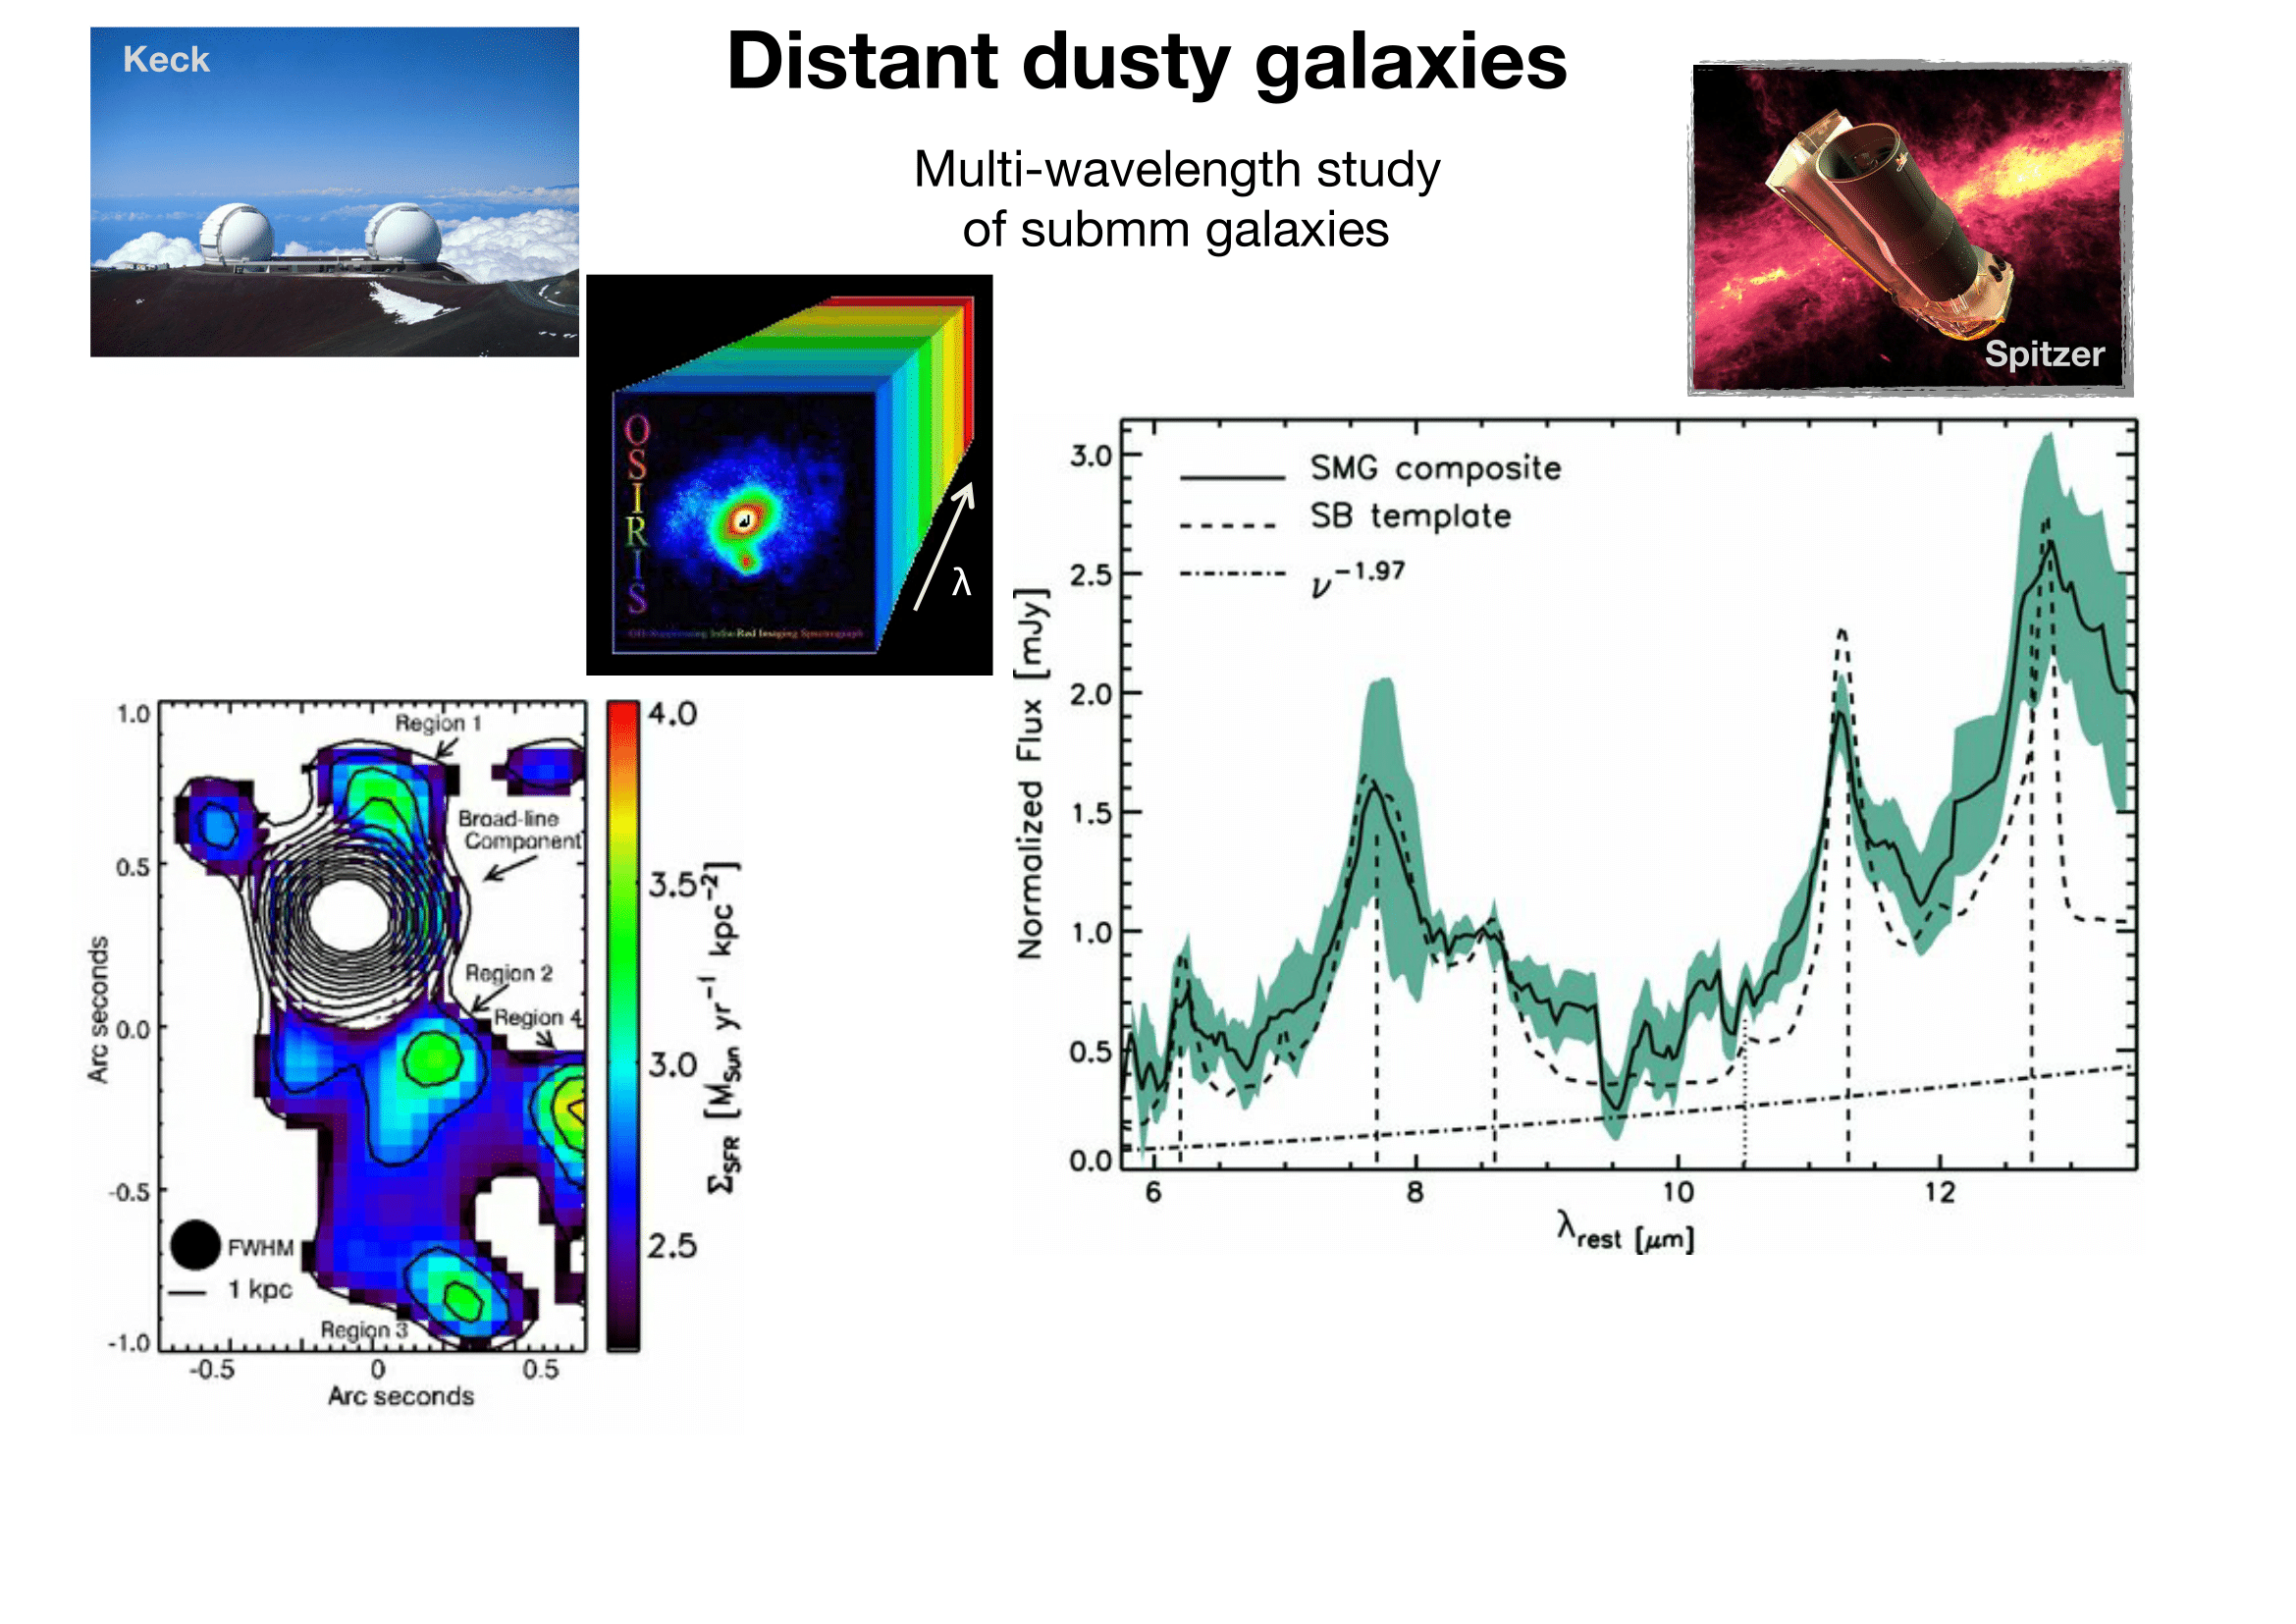 Distant dusty galaxies